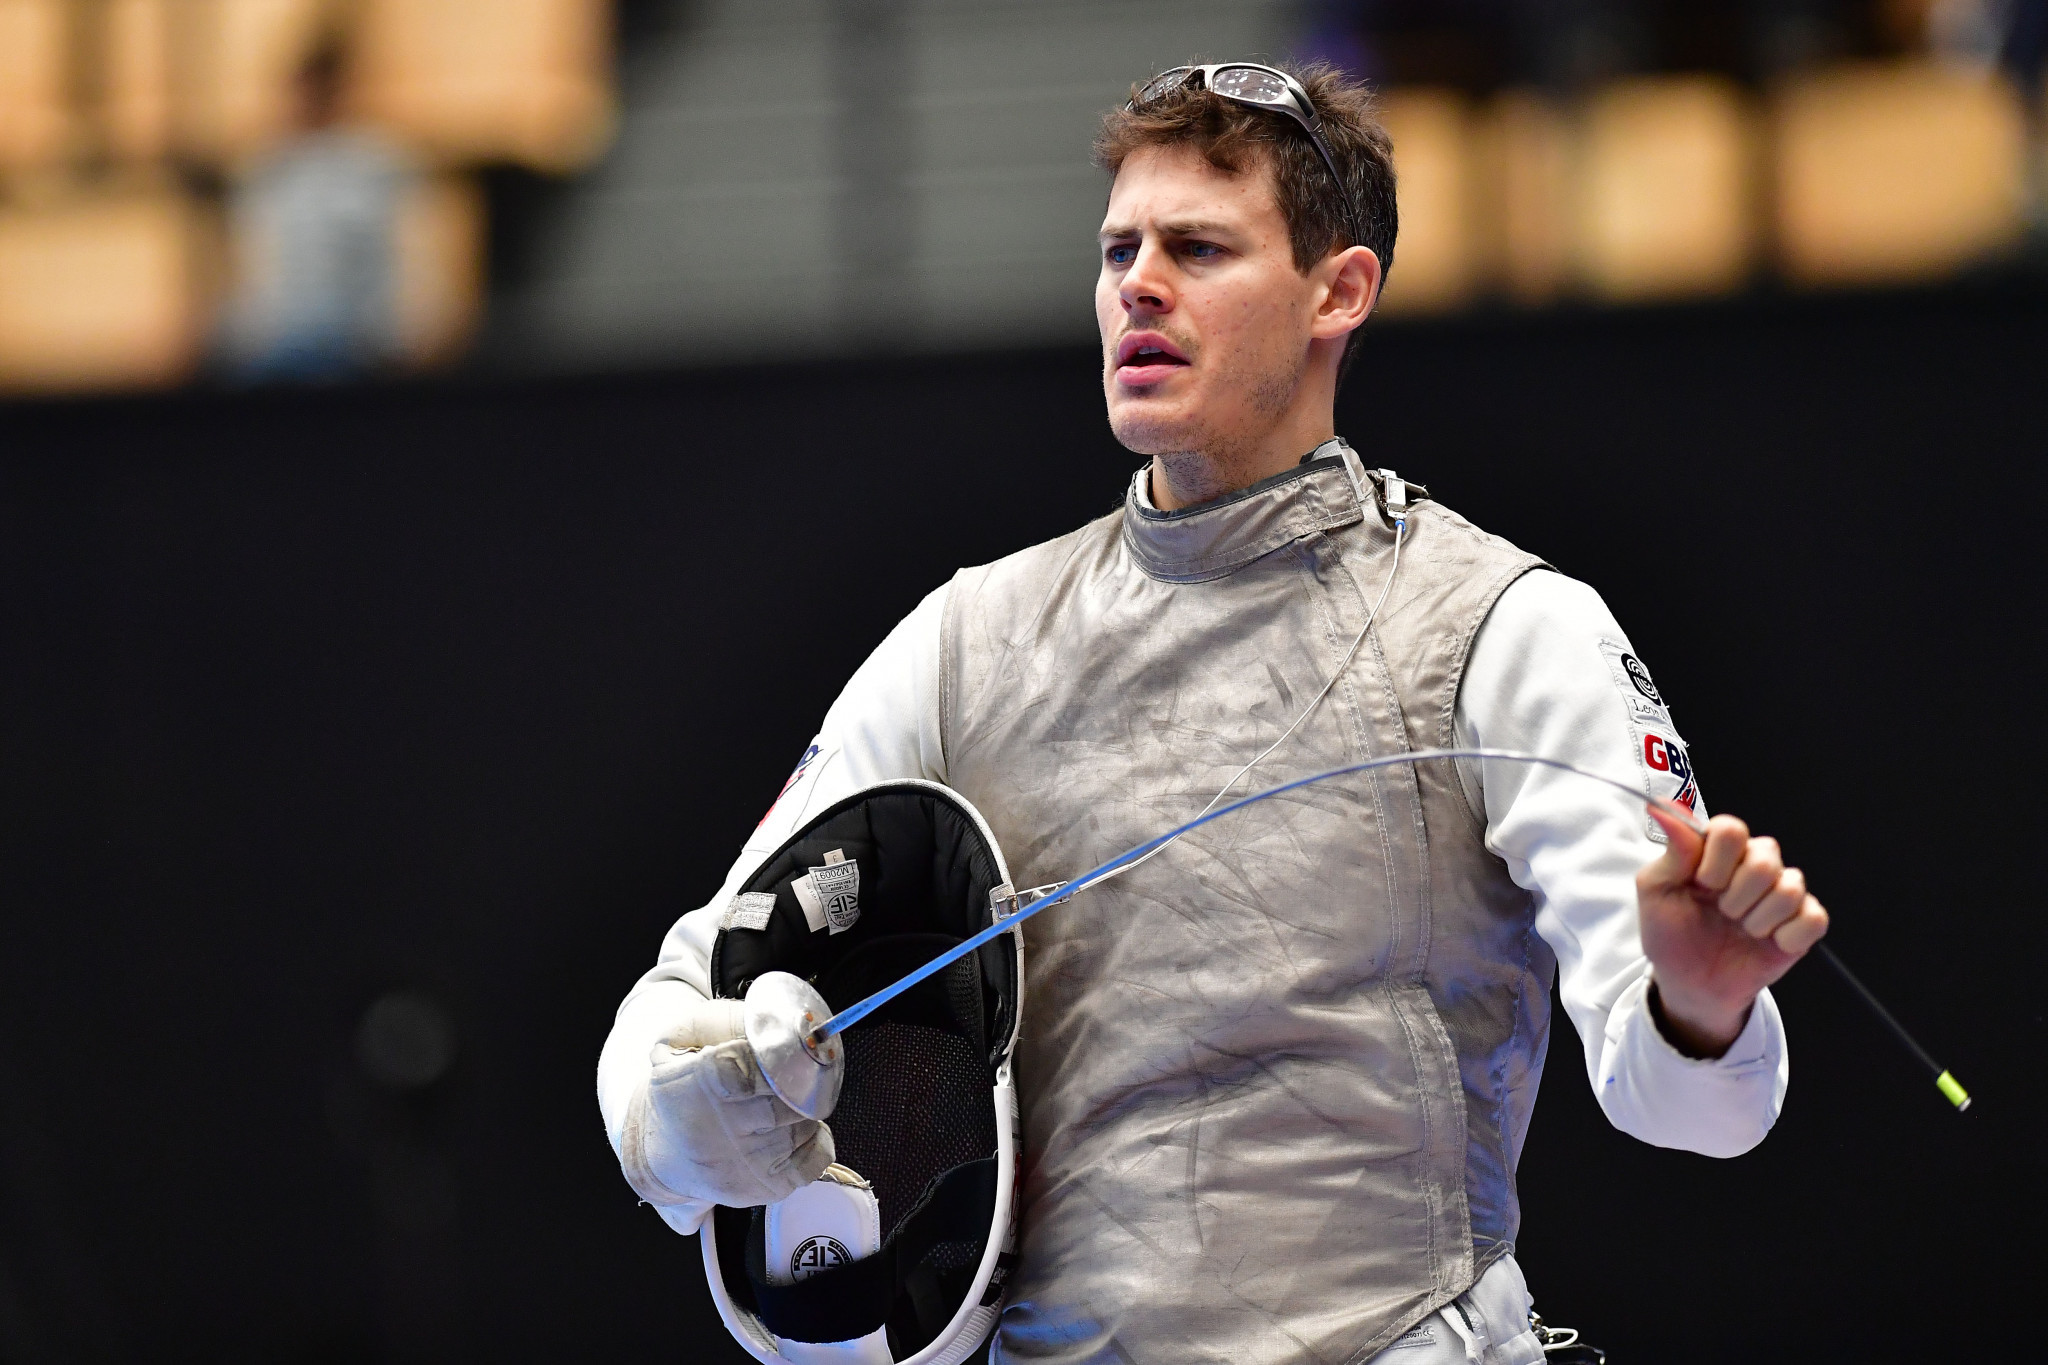 Kruse wins at FIE Foil World Cup in Tokyo to become Britain's first world number one